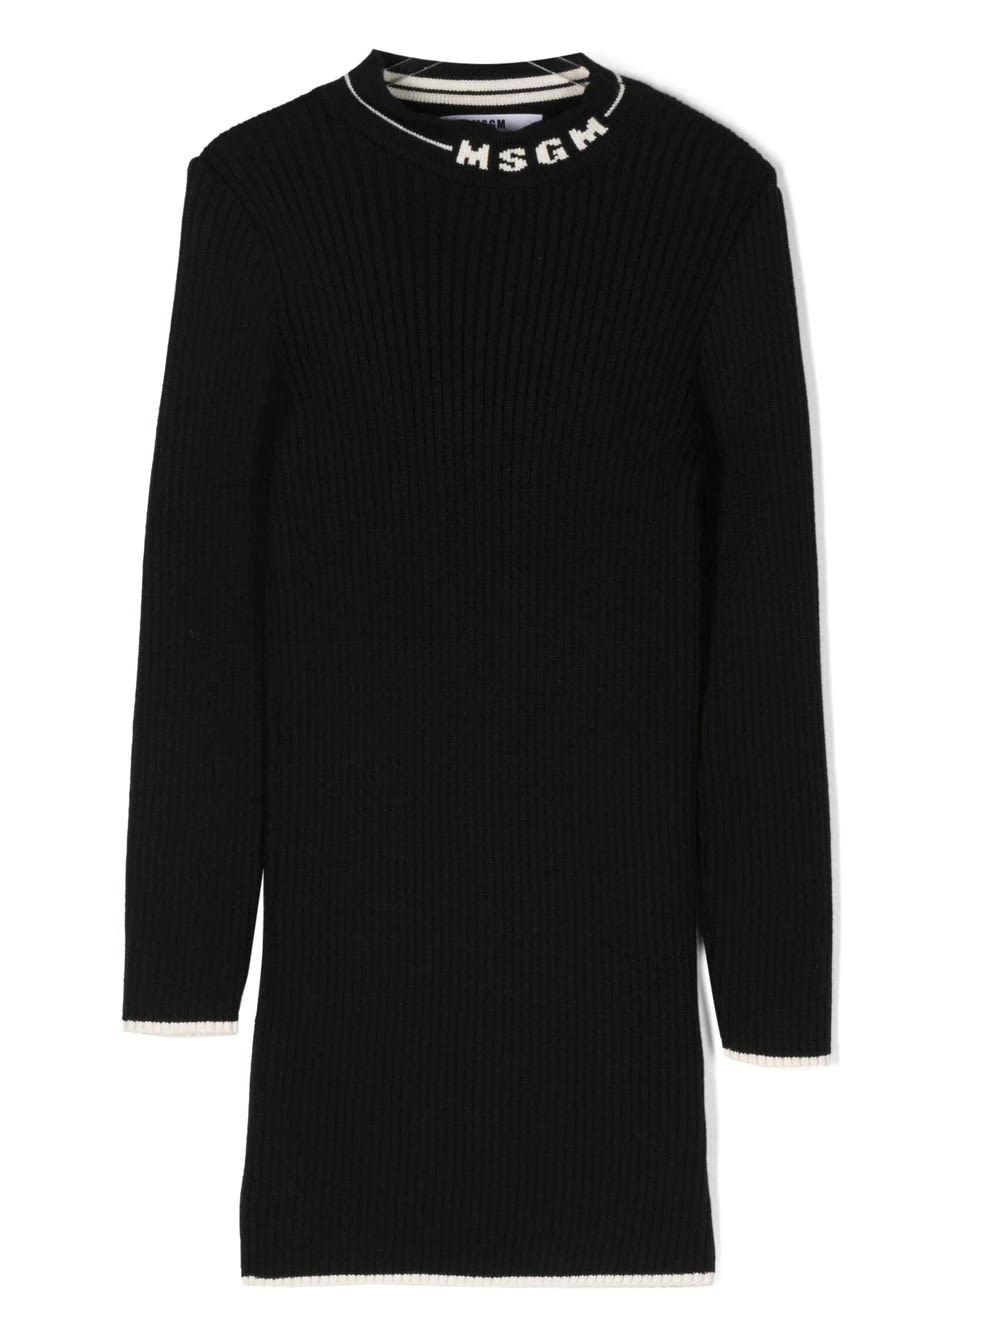 MSGM Kids Black Ribbed Dress With Logo On The Neck